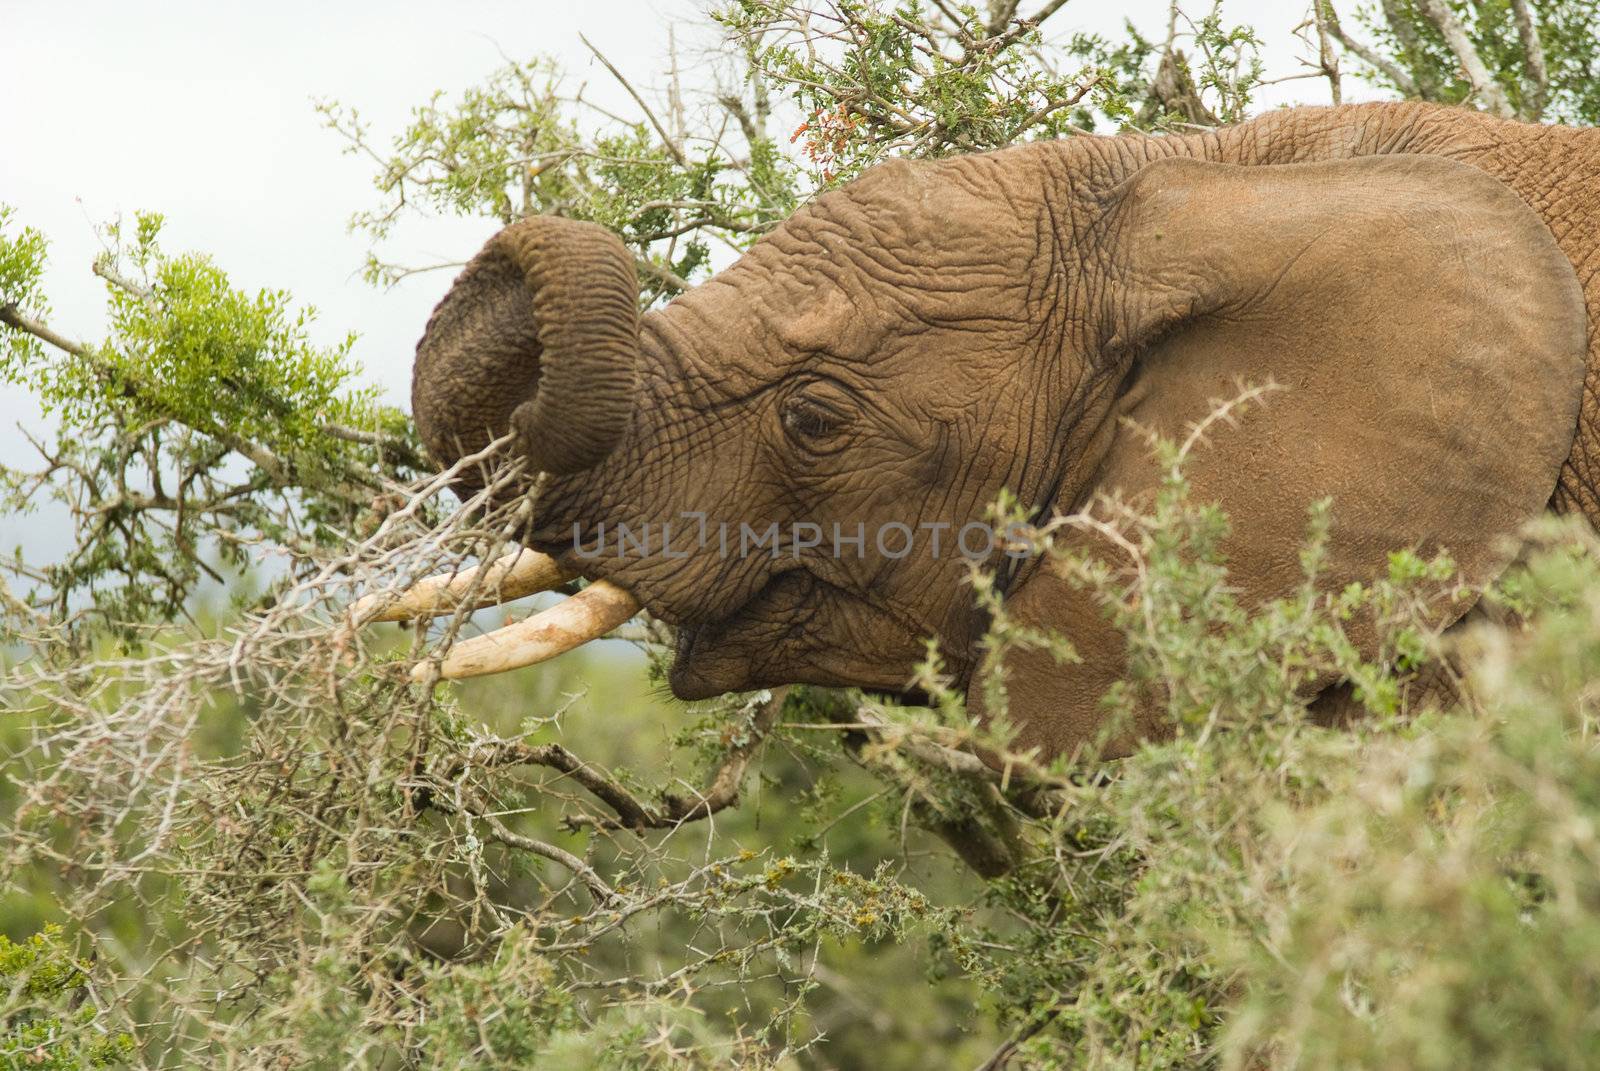 Elephant eating tree leave in South African national park safari